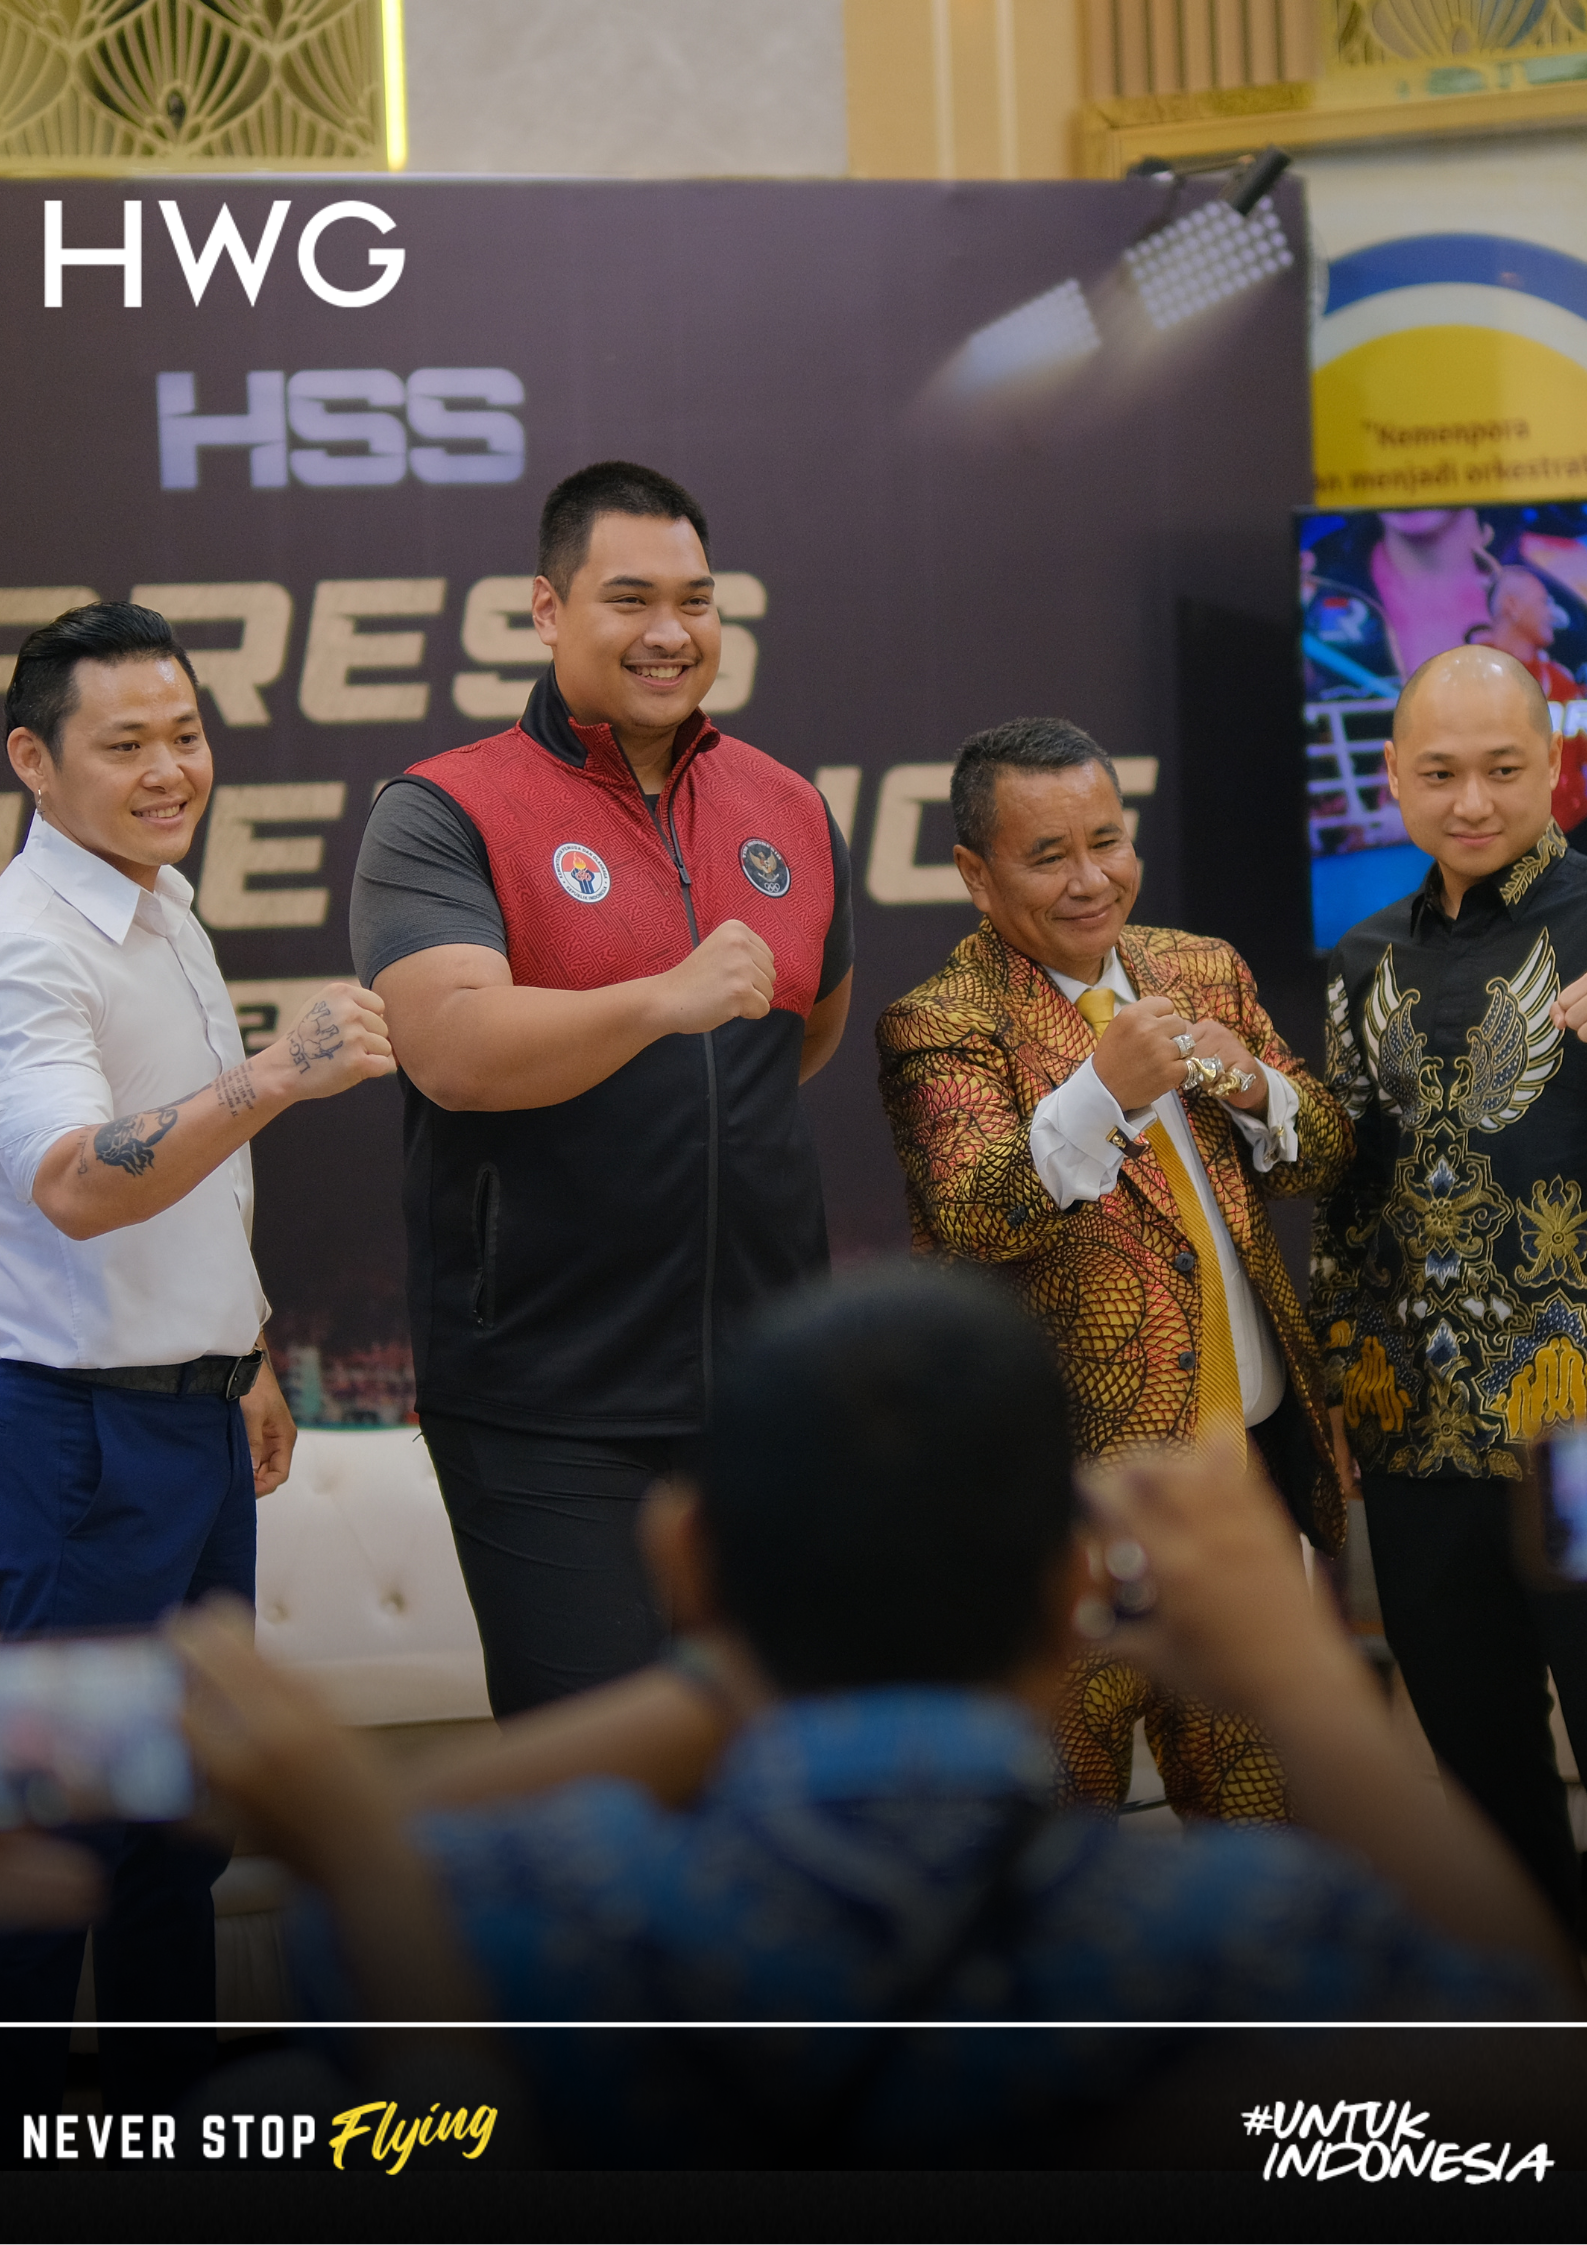 Minister of Youth and Sports Appreciates HSS 3 by HW Group for Allocating IDR 15 Billion for Thrilling Boxing Matches in 3 Cities